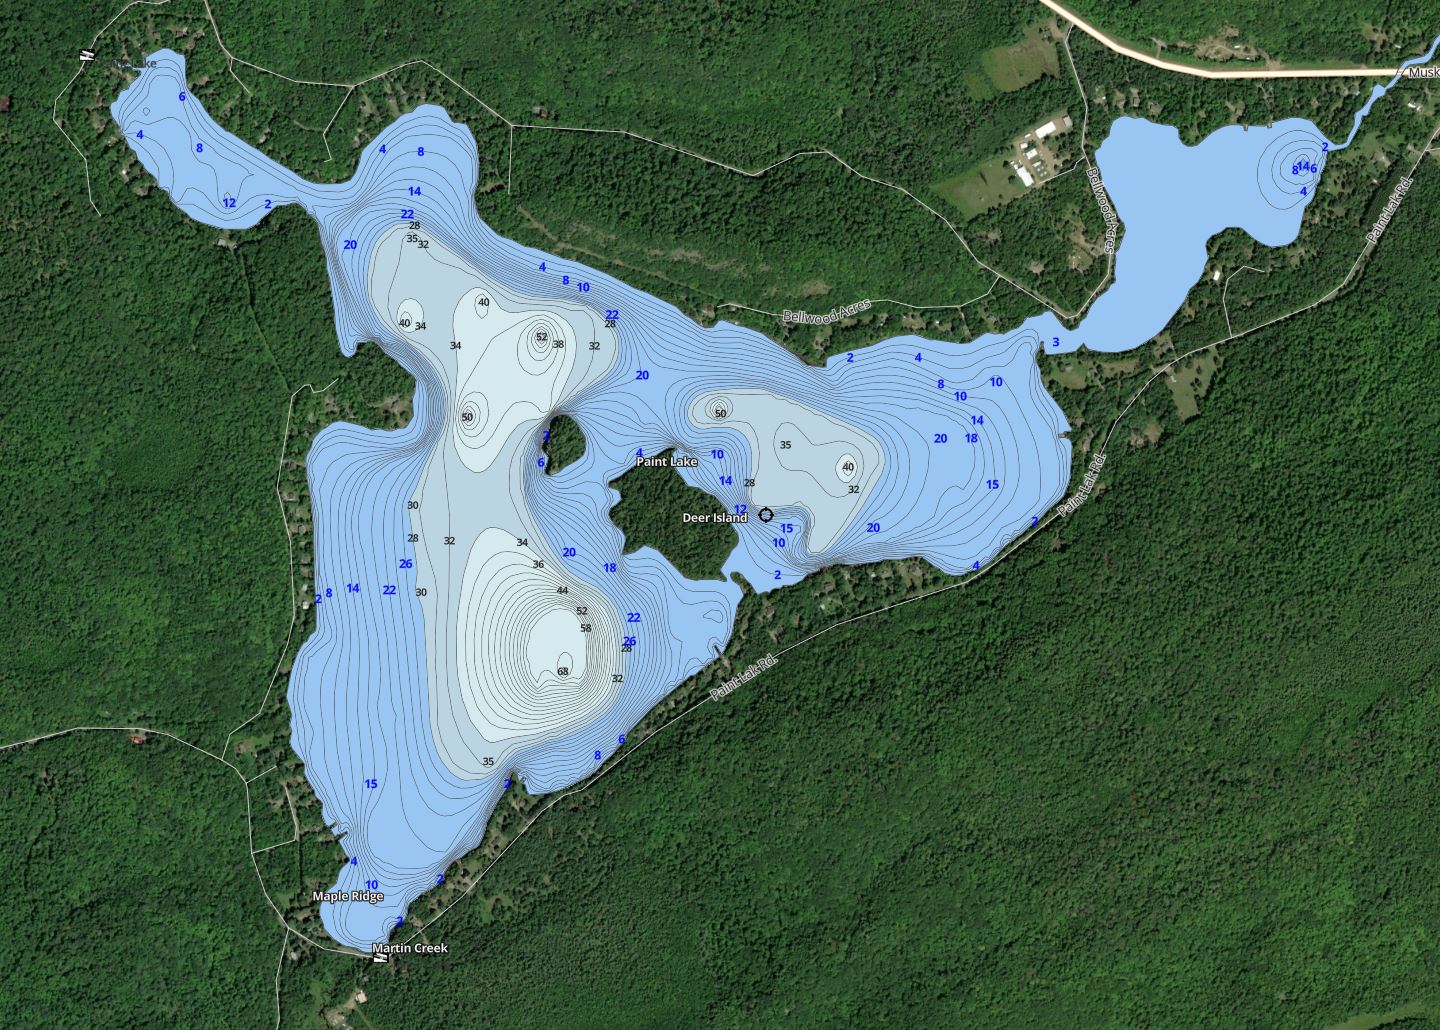 Contour Map of Paint Lake in Municipality of Lake of Bays and the District of Muskoka